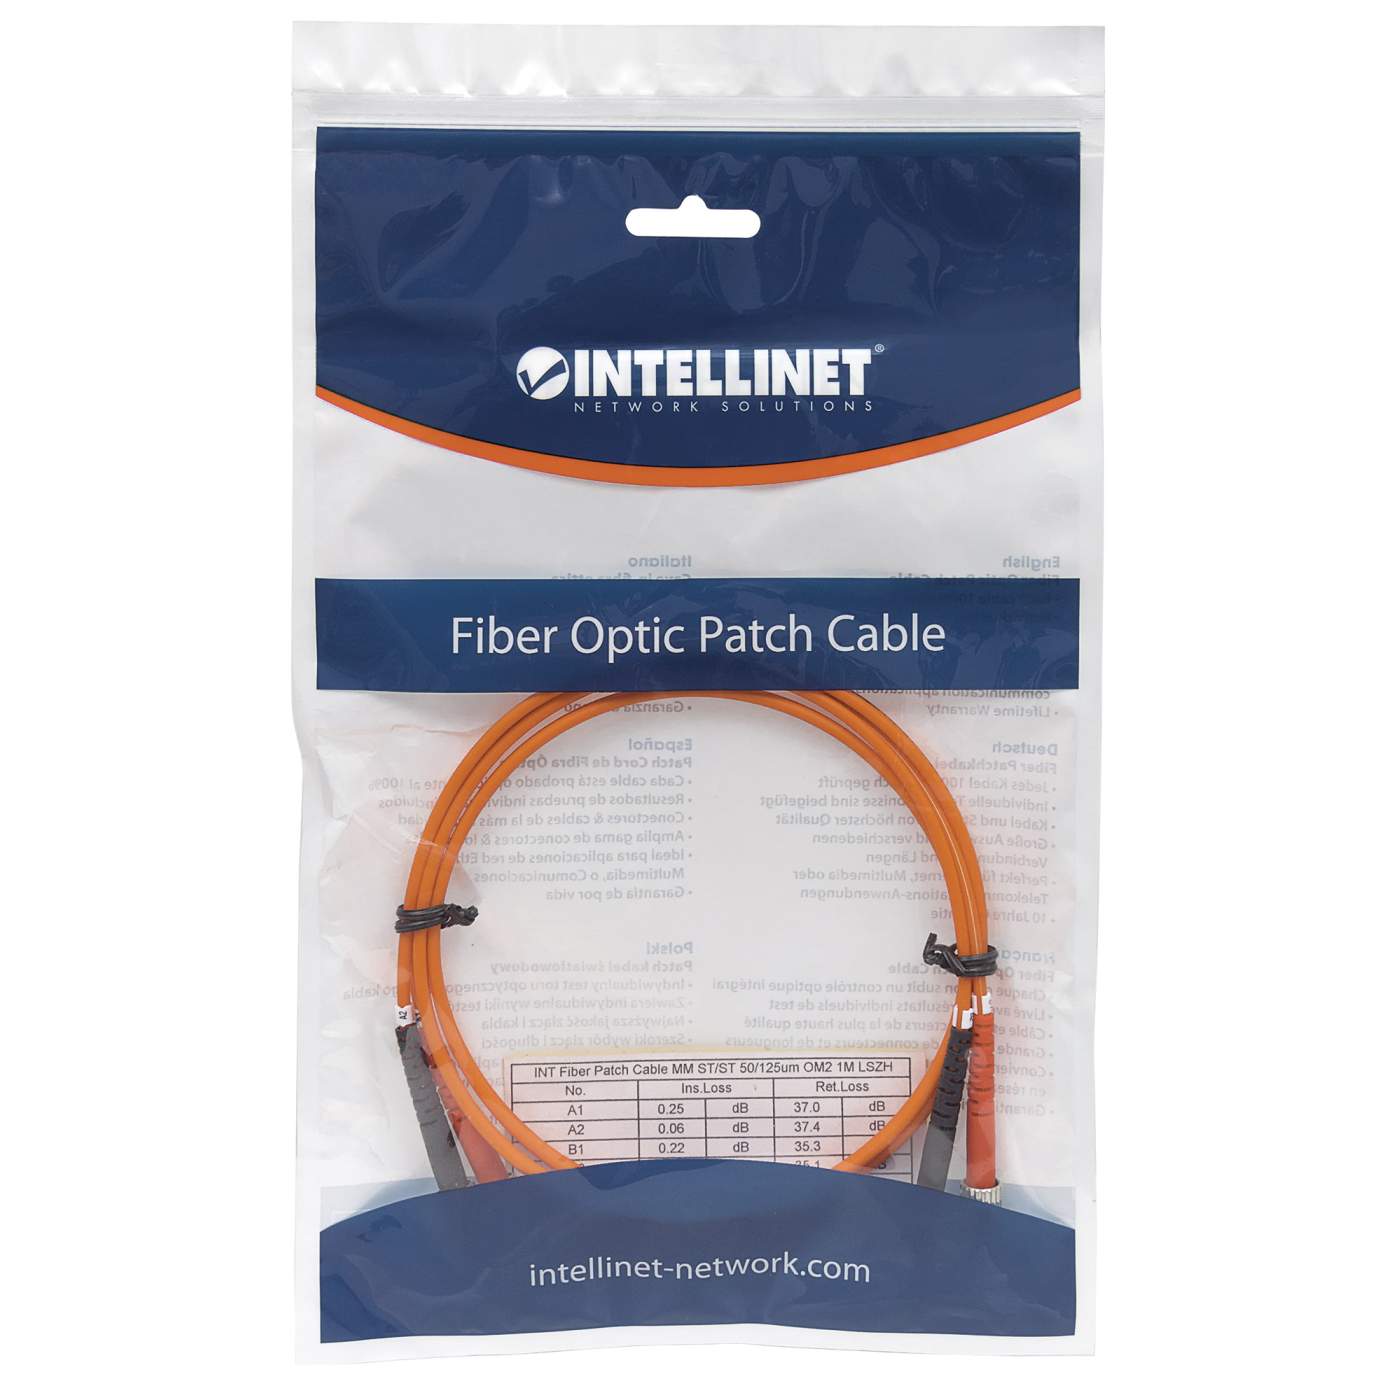 Fiber Optic Patch Cable, Duplex, Multimode Packaging Image 2